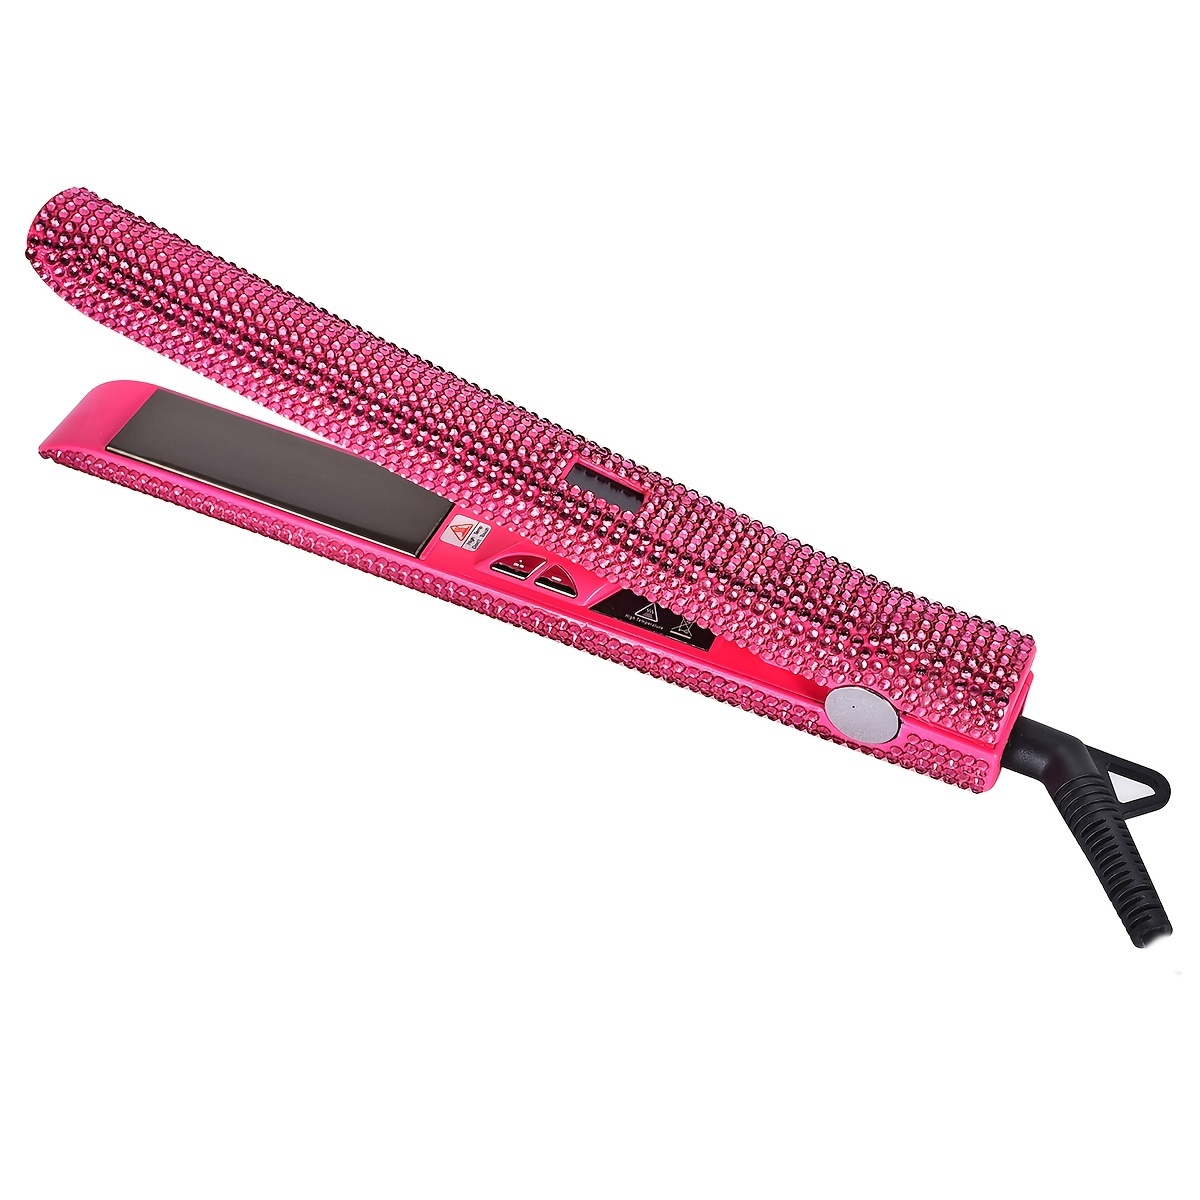 https://img.kwcdn.com/product/professional-fast-heating-adjustable-temperatures-hair-straightener/d69d2f15w98k18-1ec57dee/1d6586fa08/dd279e45-190a-4cc2-a808-388210dc6553_1200x1200.jpeg.a.jpg